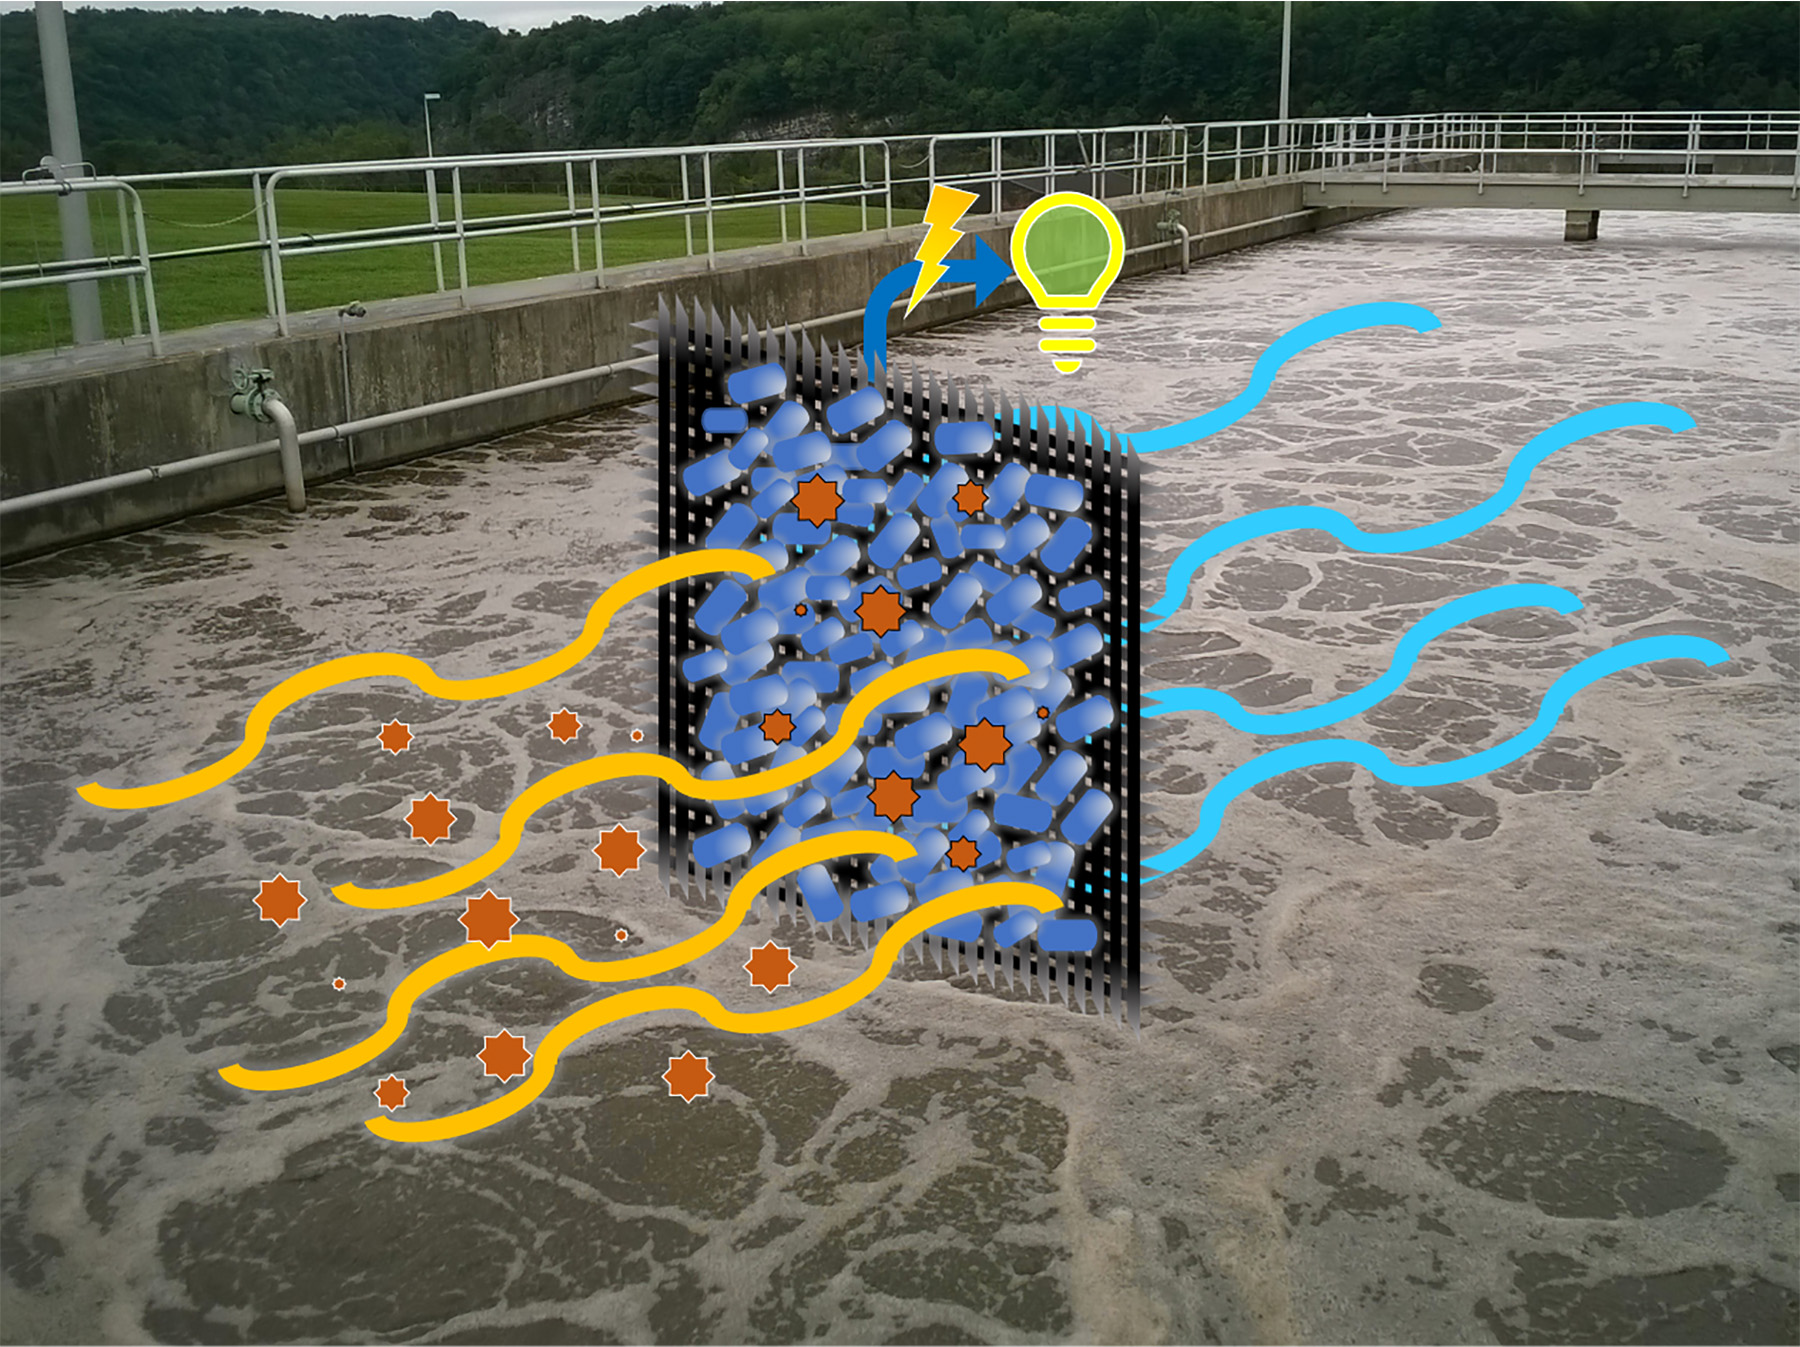 black grid with blue dots on it with yellow squiggly lines coming out the front and blue squiggly lines out the back. the grid is stuck in water. This image shows wastewater flowing through a membrane that acts as a filter and produces energy.